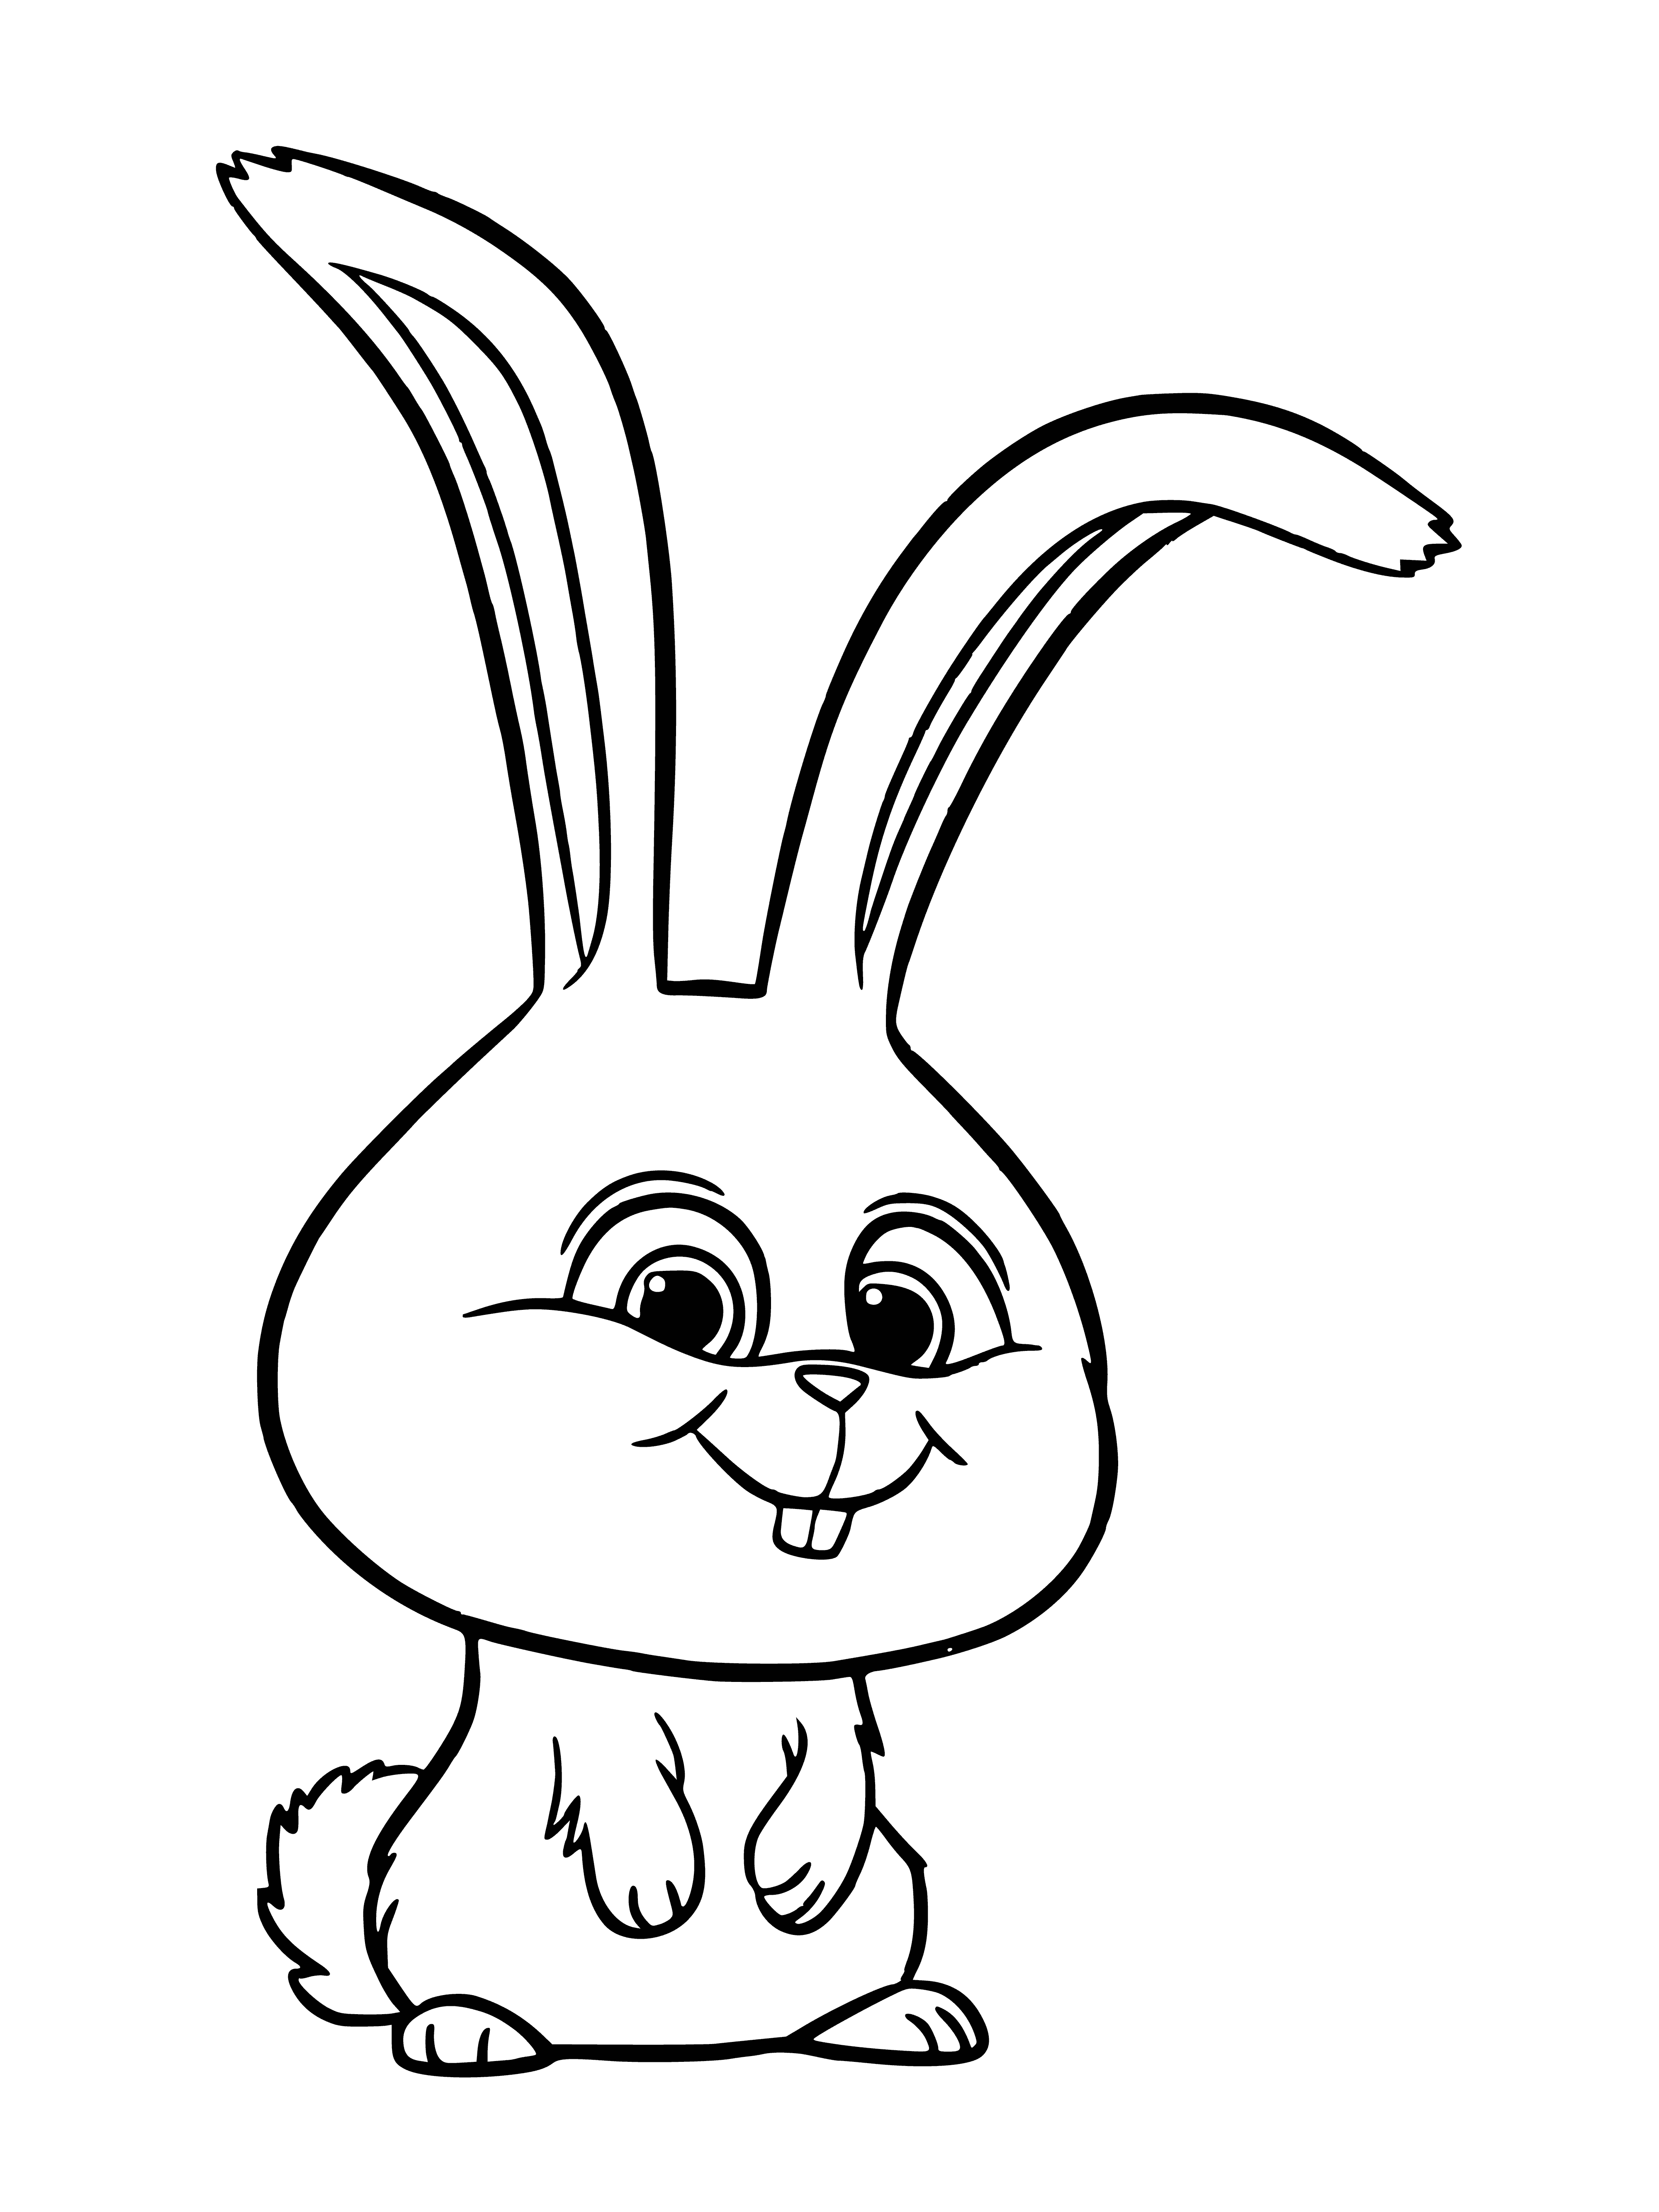 Rabbit Snowball coloring page